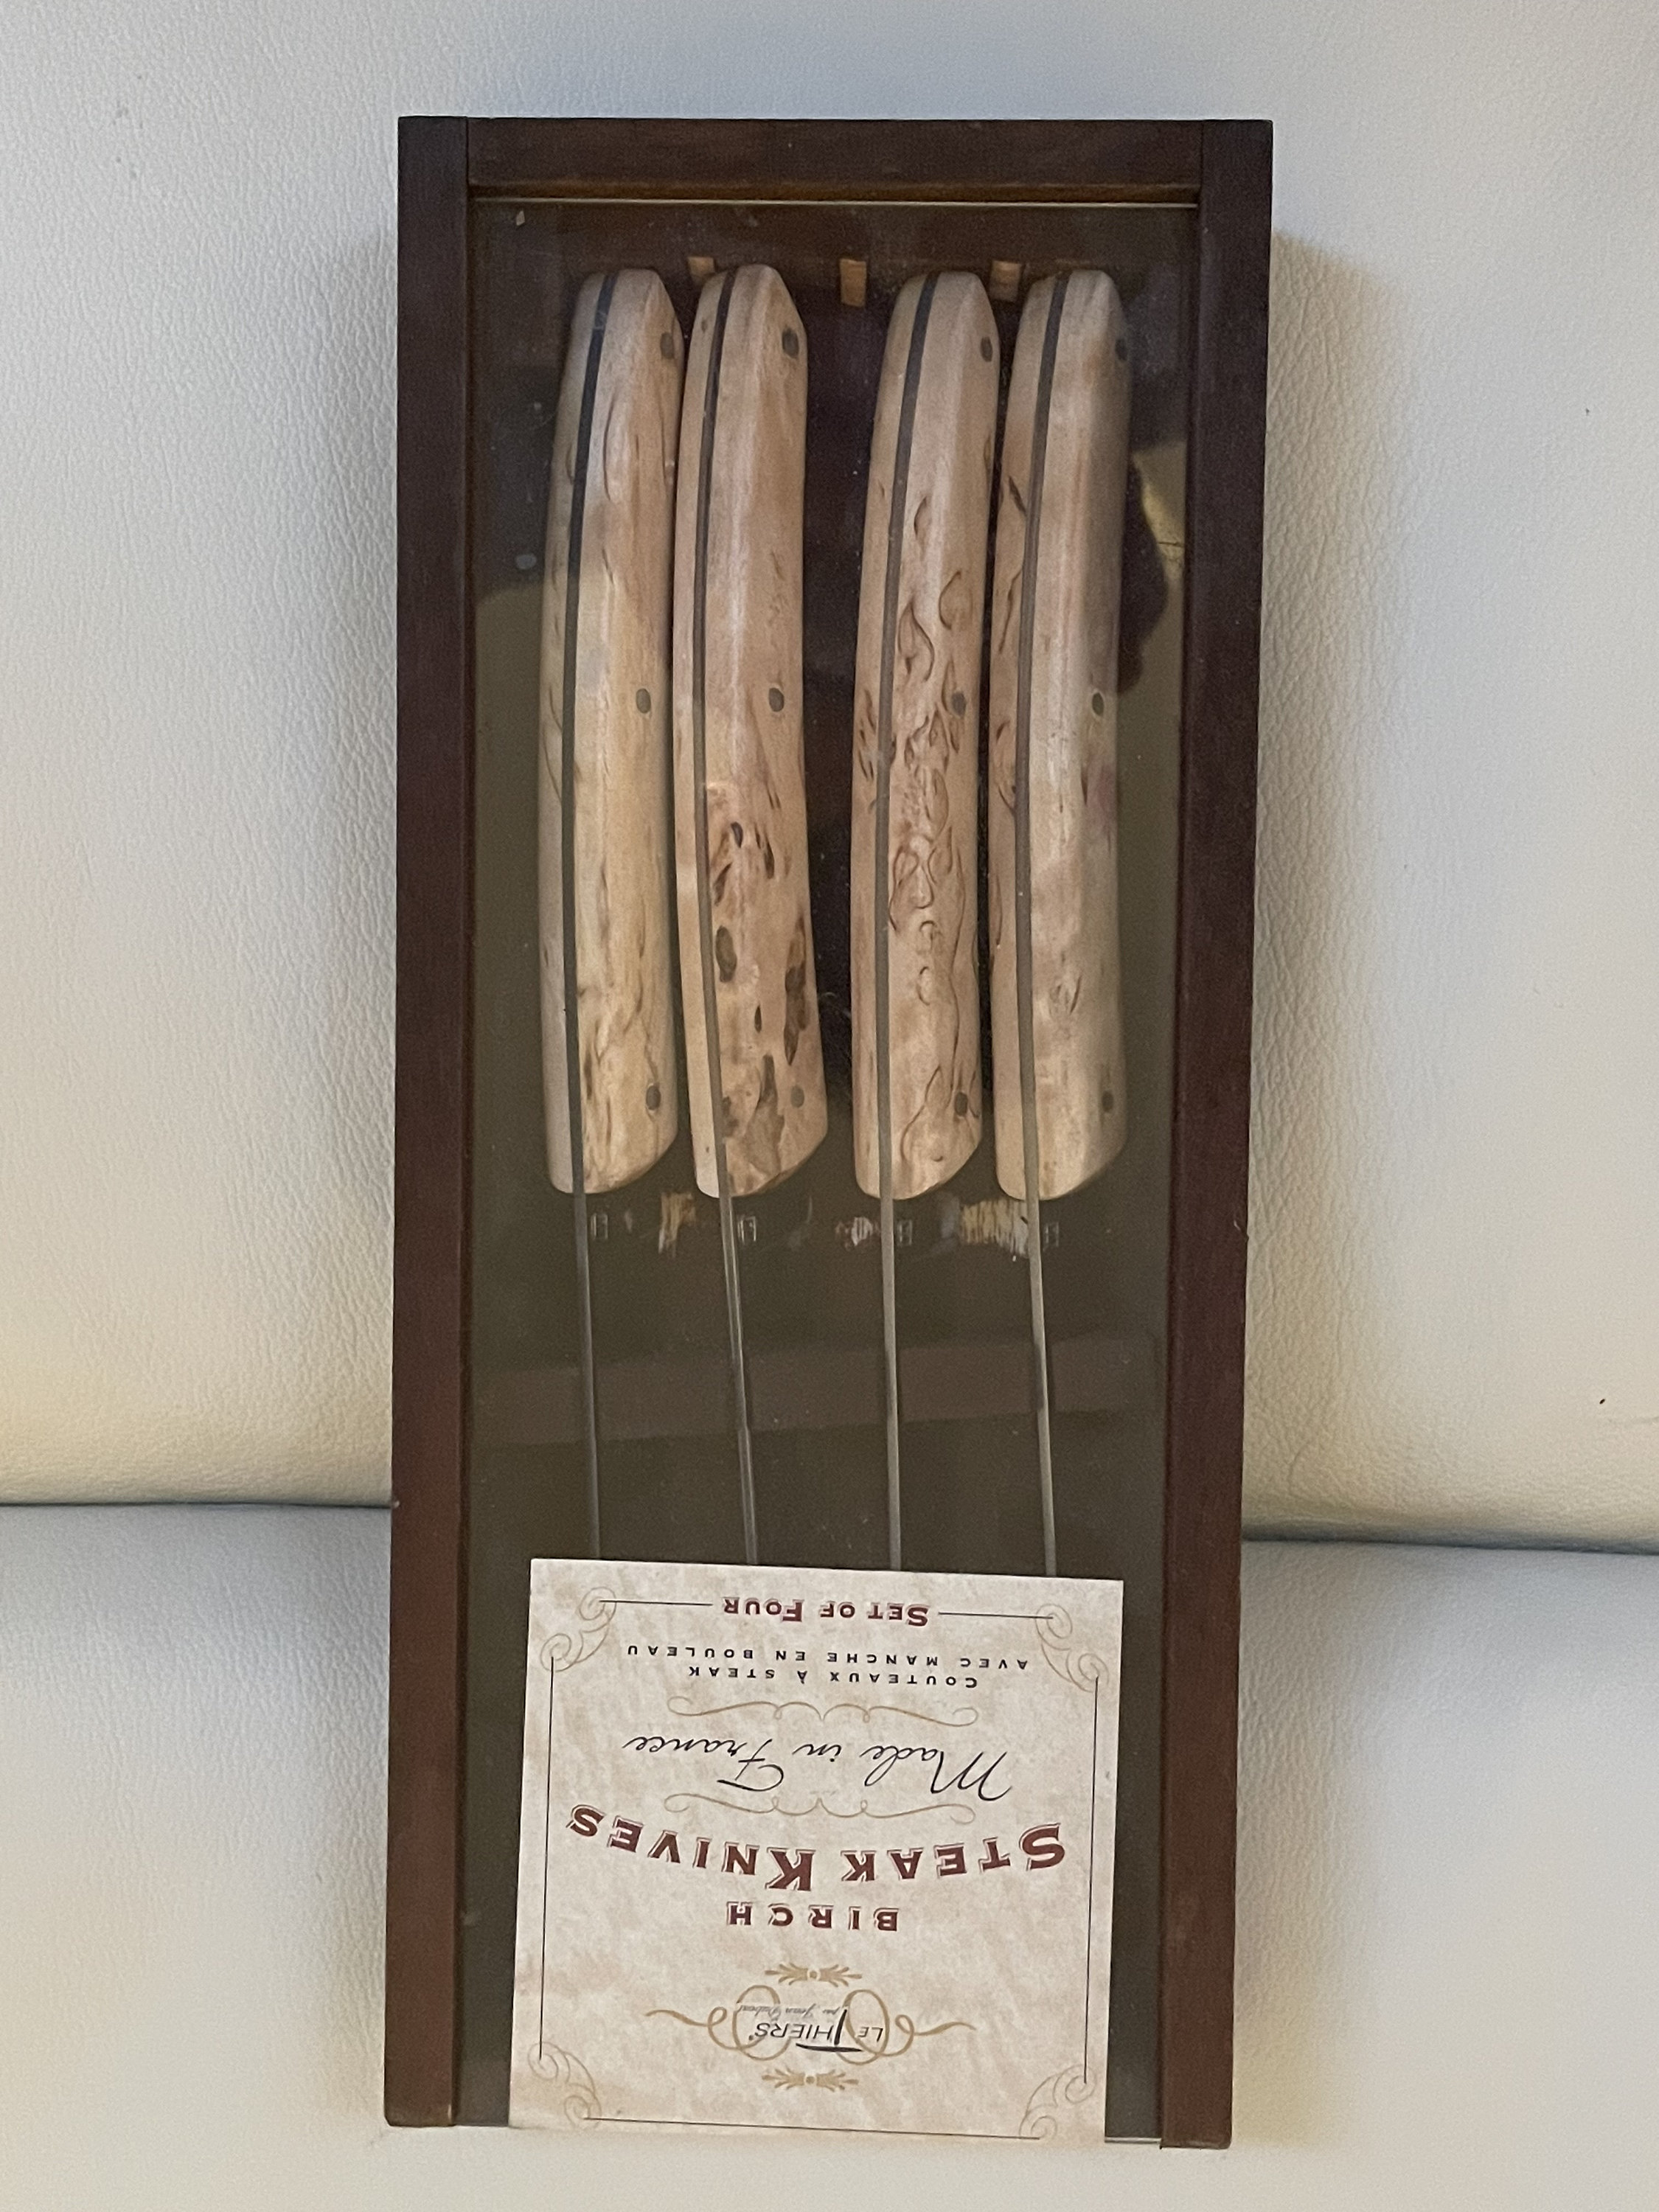 The Birch Store French Steak Knives